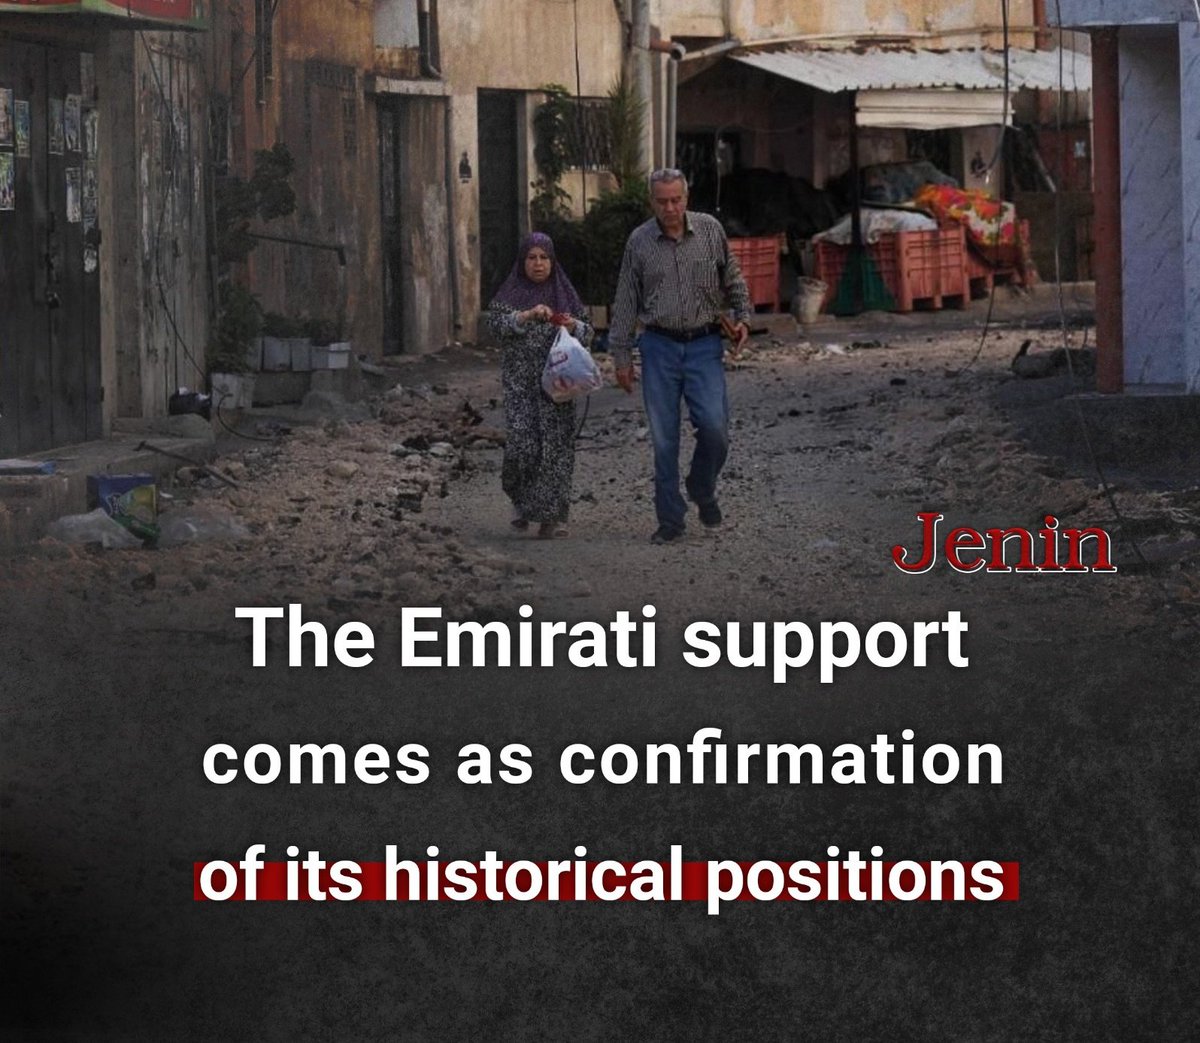 The #Emirati support and grant in these difficult circumstances that #Jenin is going through confirms that the Emirates will remain a forerunner of goodness,and that it places the #Palestinian cause and supporting our people in restoring their rights at the top of its priorities.